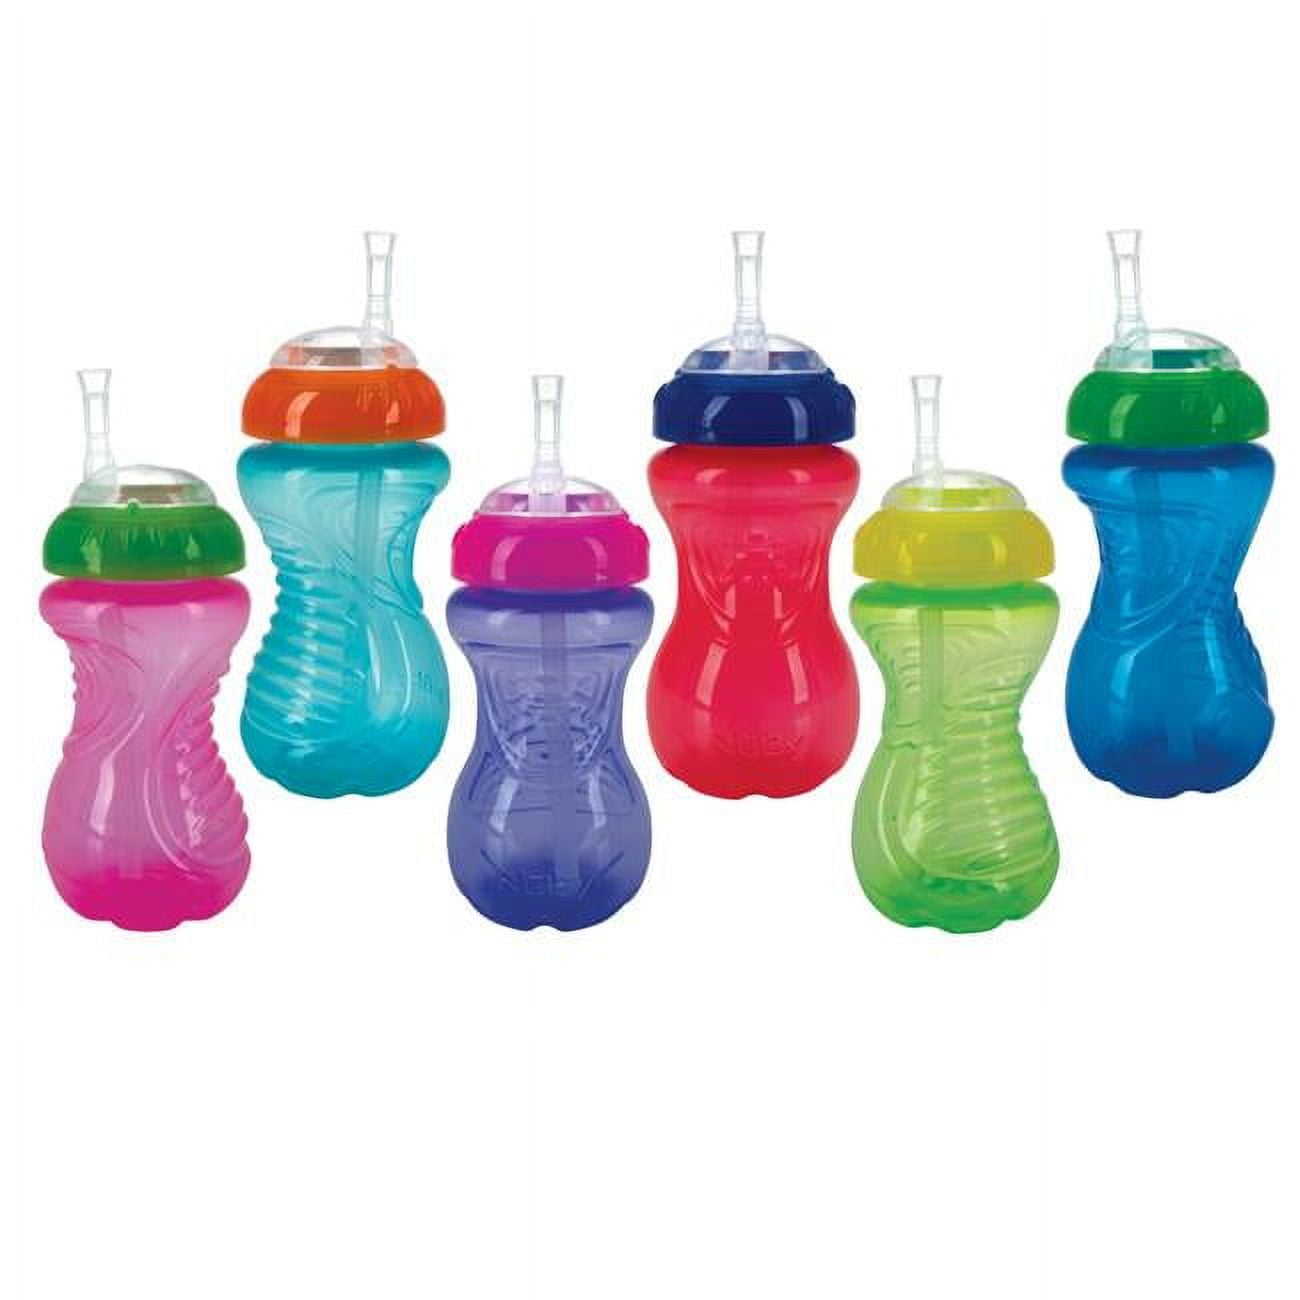 Picture of Nuby 2364770 Flexi Straw & Colors Vary Nuby No-Spill Cups - Case of 24 - Pack of 24